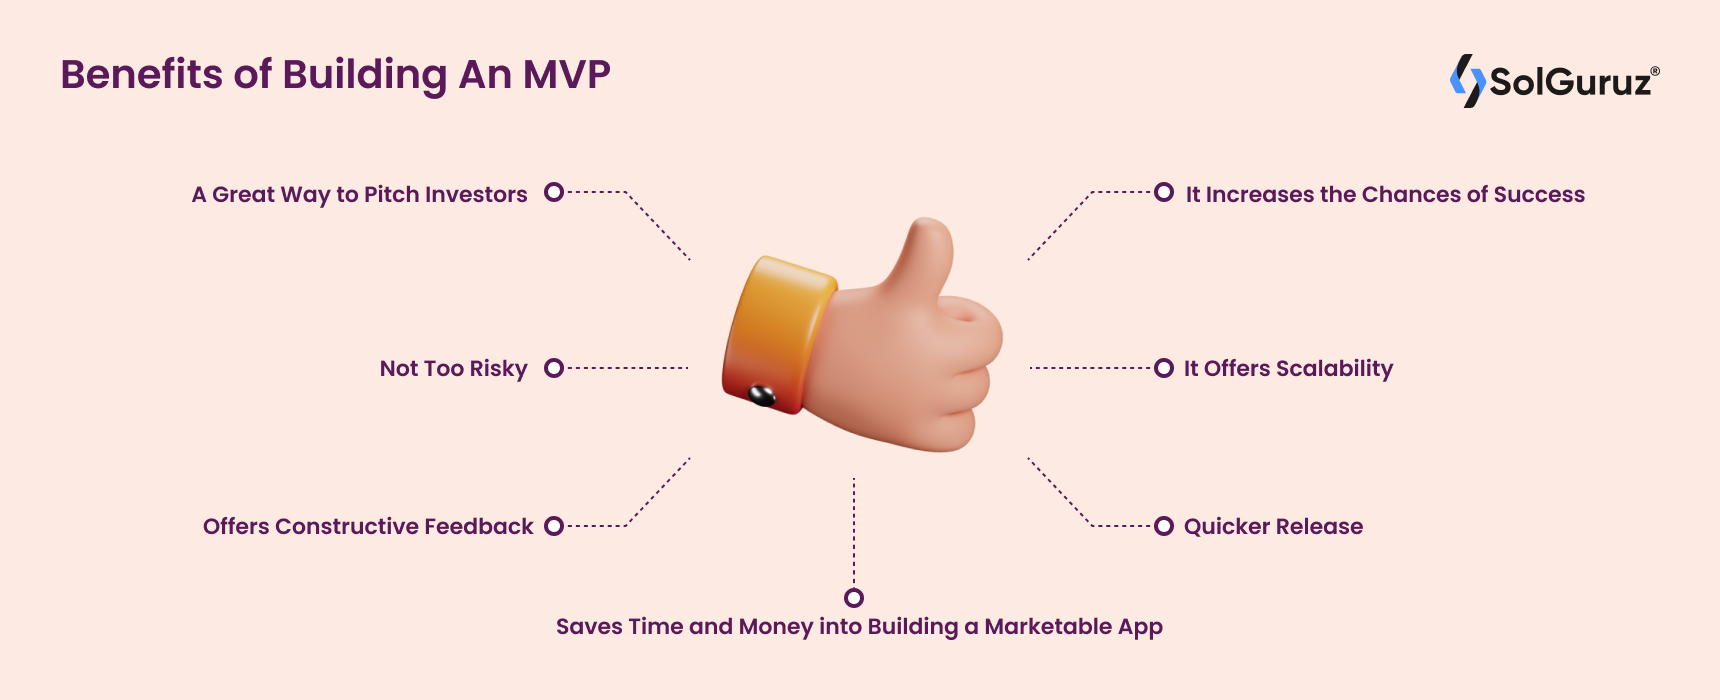 Benefits of Building An MVP - Benefits of building a minimum viable product